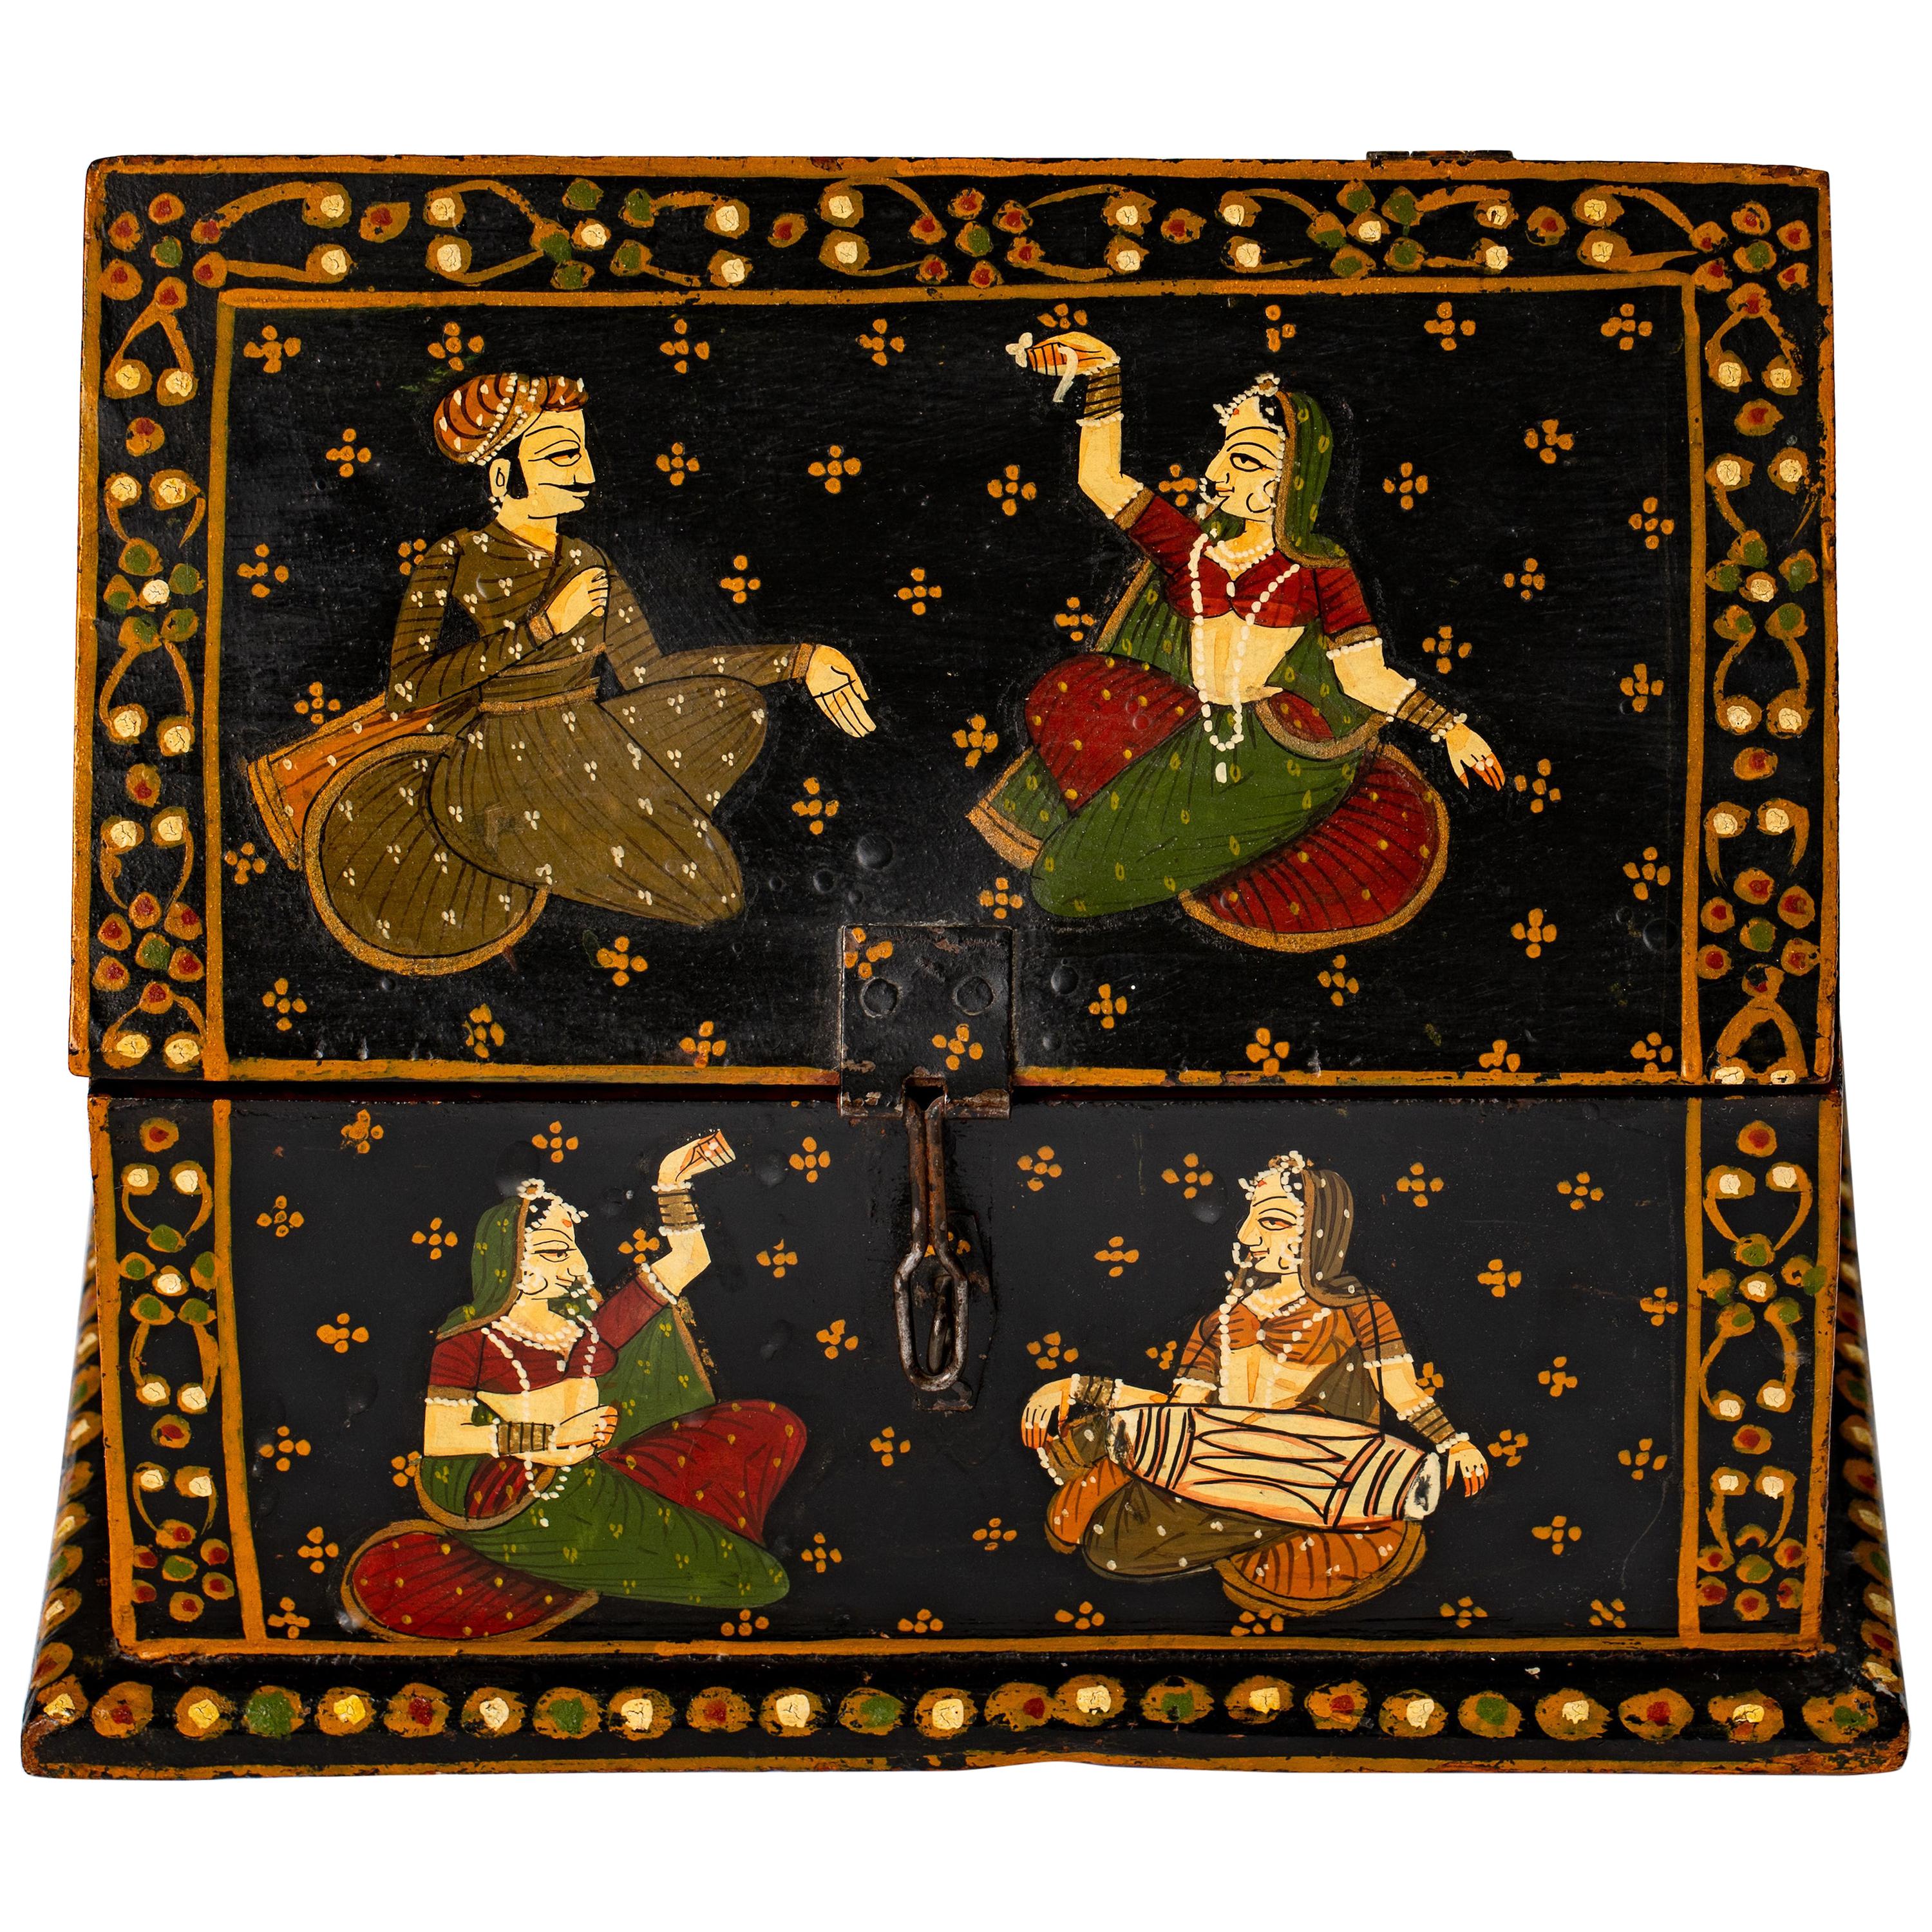 Rajasthani Indian Hand Painted Wood Jewelry Dowry Box